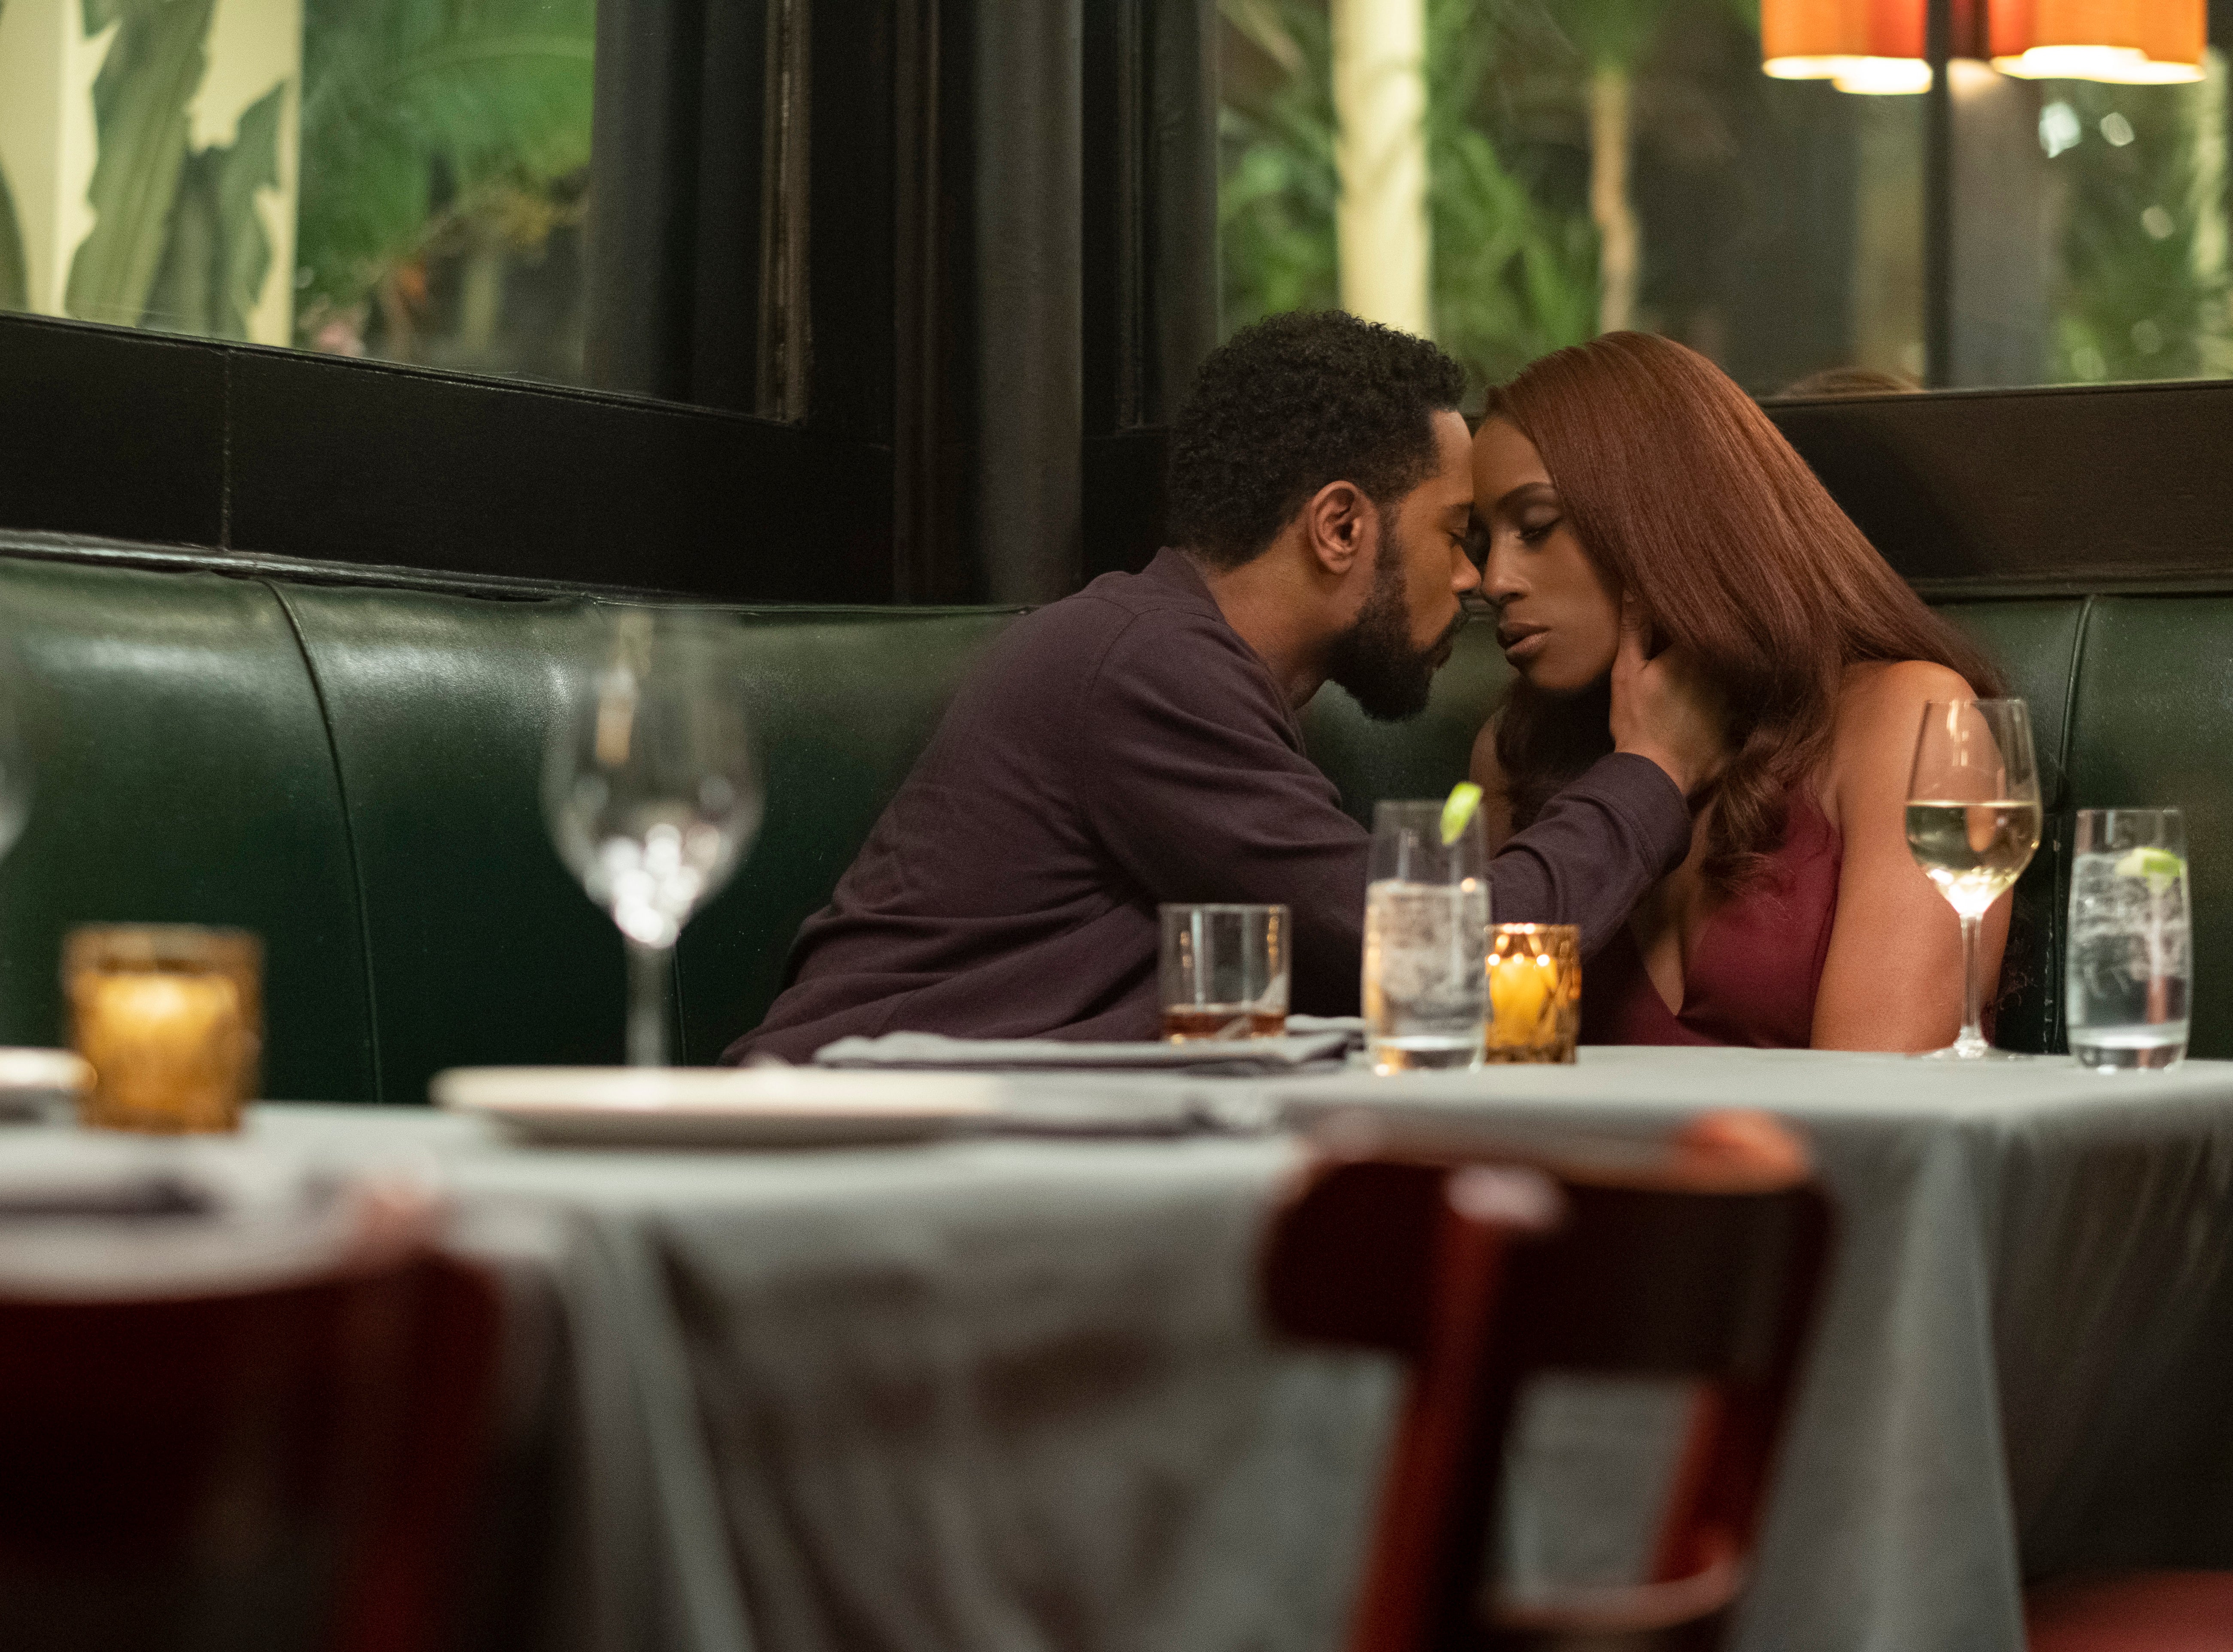 Issa Rae and LaKeith Stanfield Are Bringing Black Love To The Big Screen In New 'Photograph' Trailer